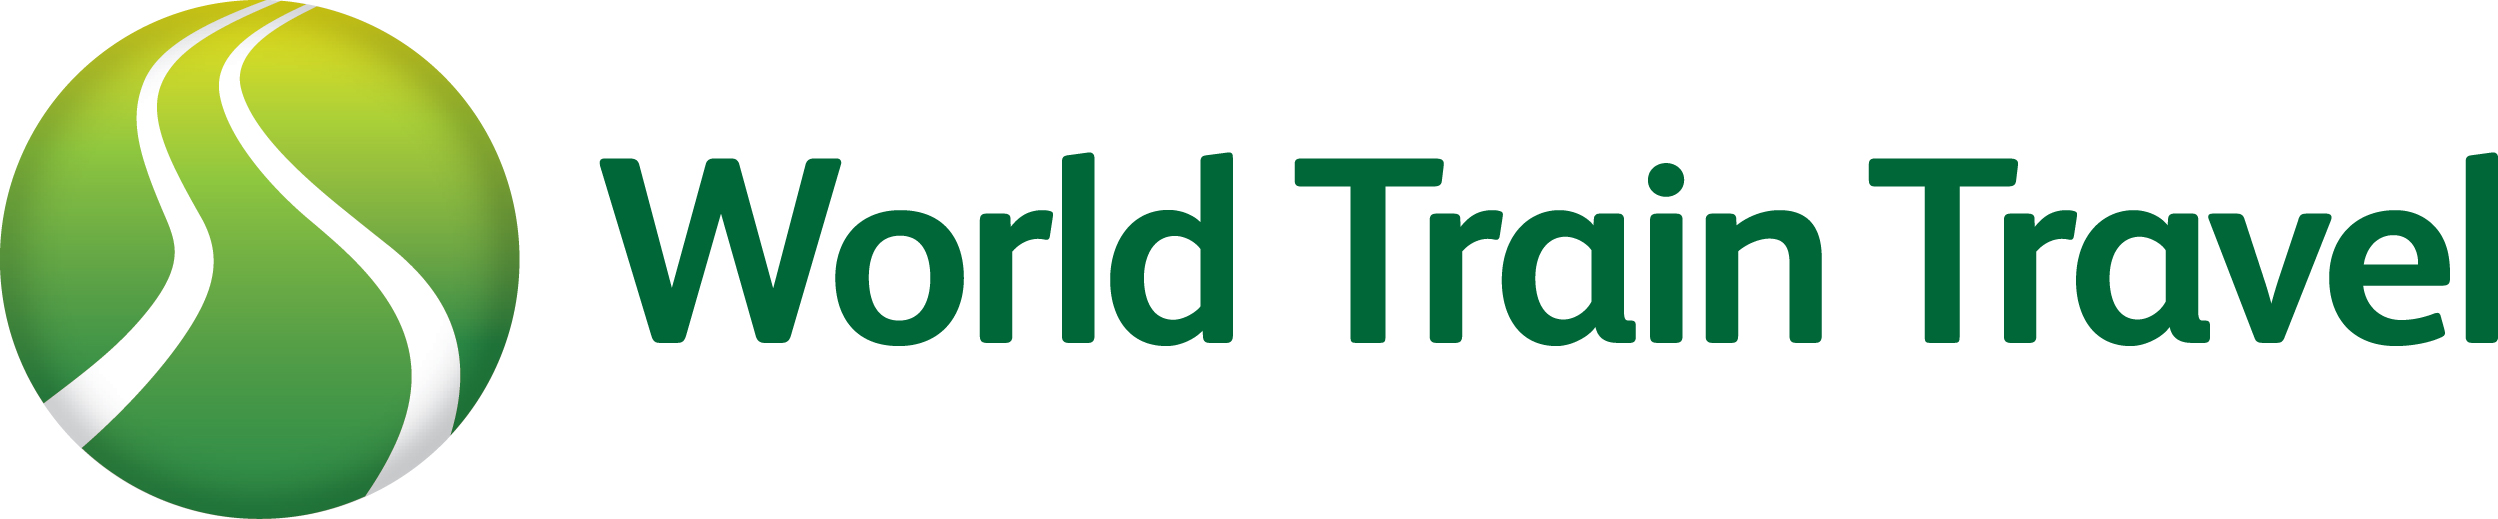 World Train Travel is part of Train Chartering